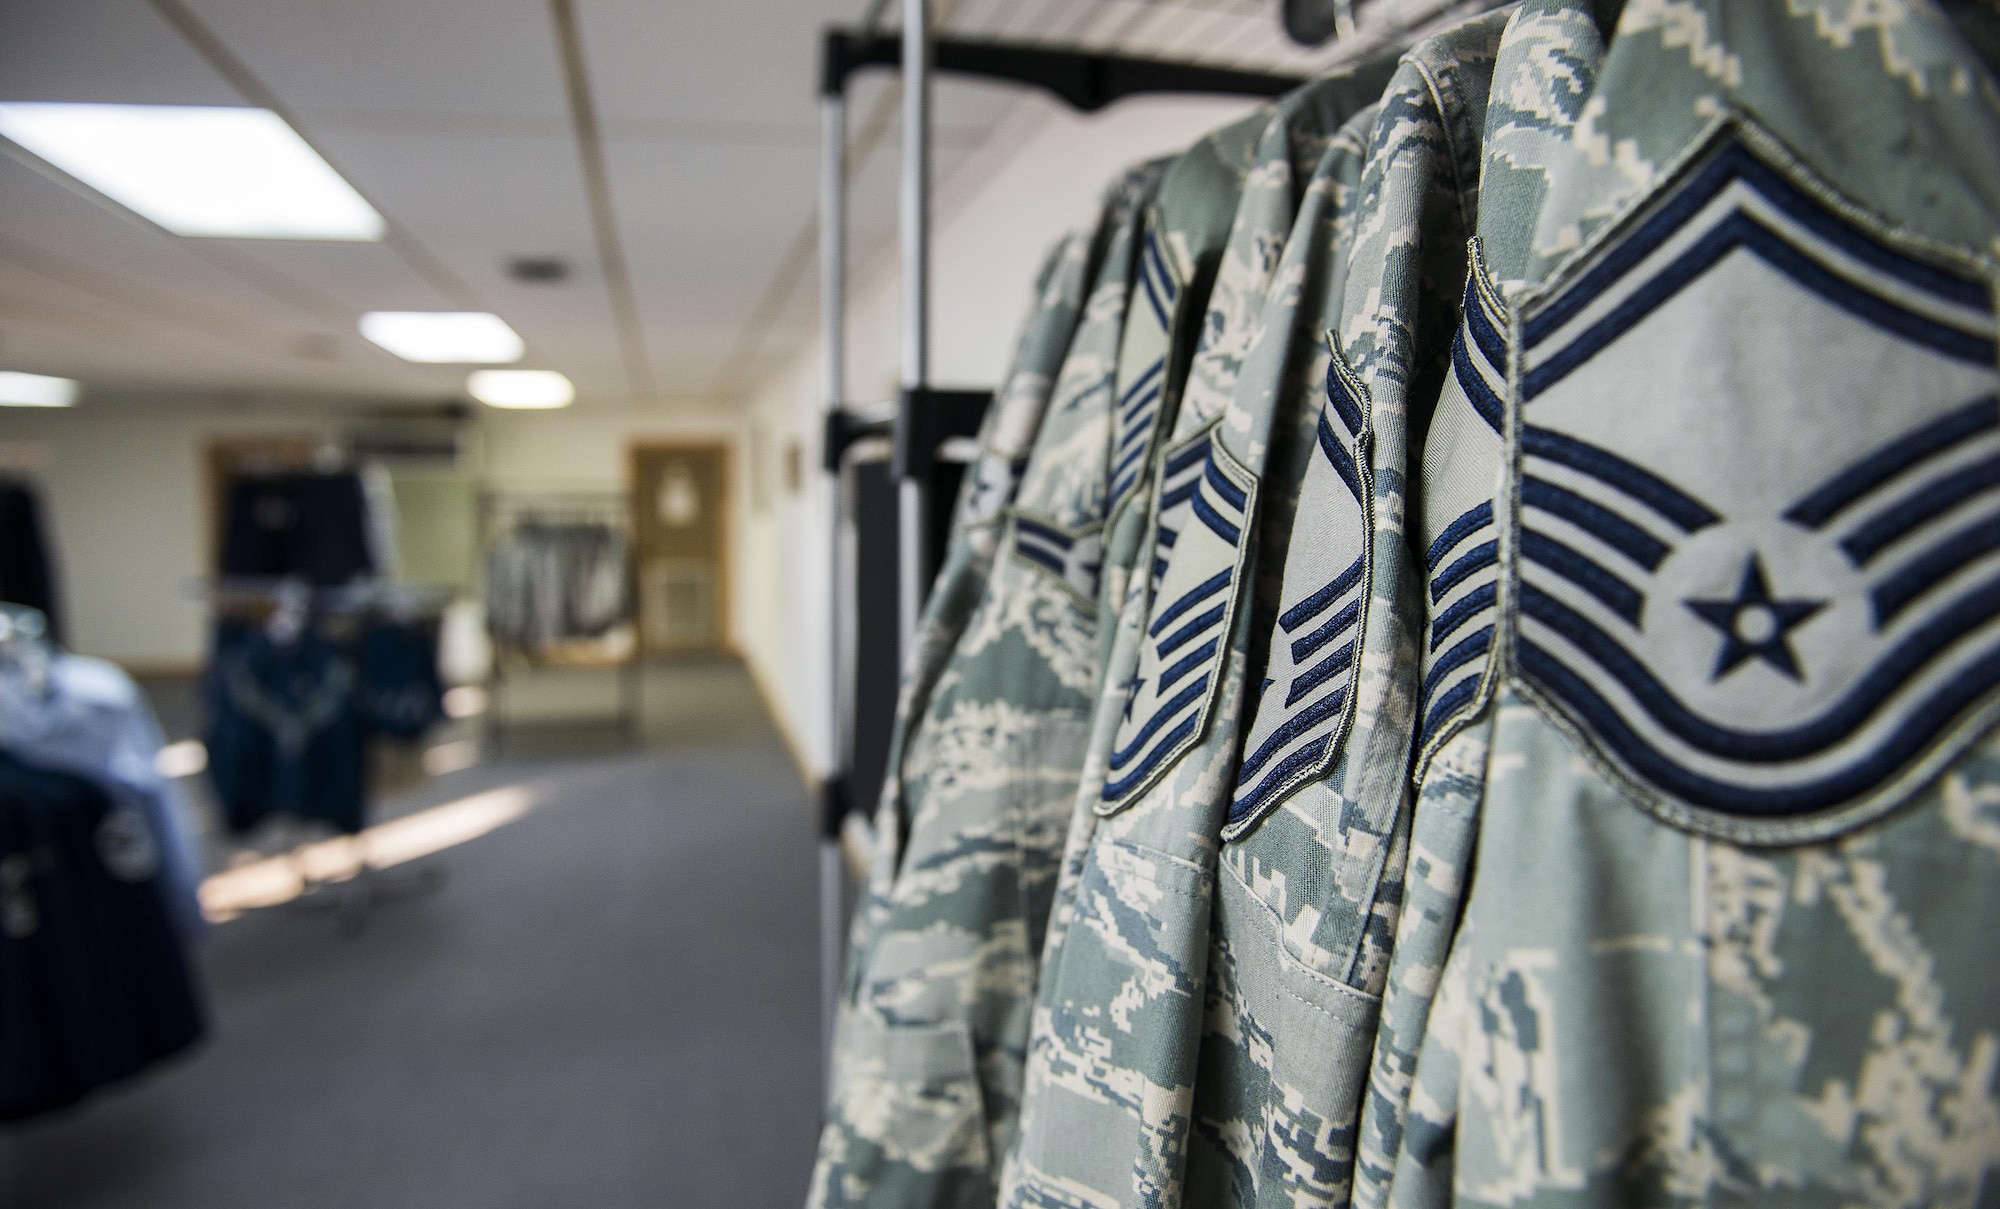 Two dozen of the 919th Special Operations Wing's finest sewed on new stripes in August. (U.S. Air Force photo/Tech. Sgt. Sam King)